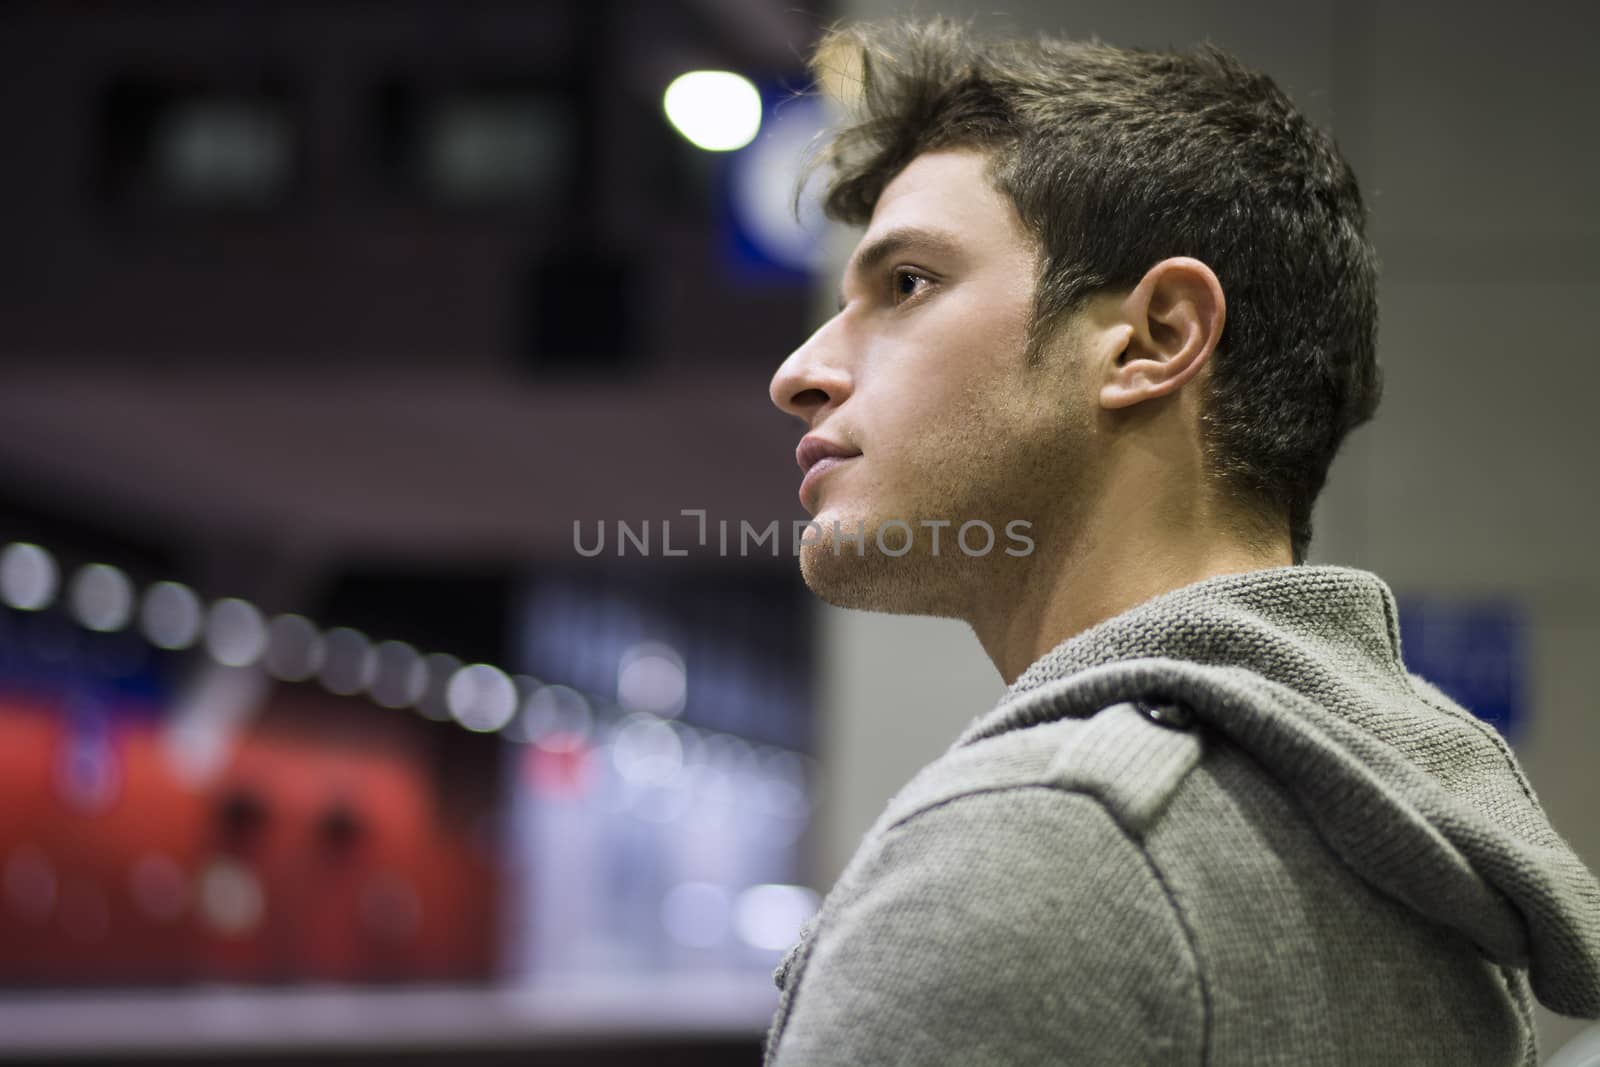 Profile shot of handsome young man inside train station looking away